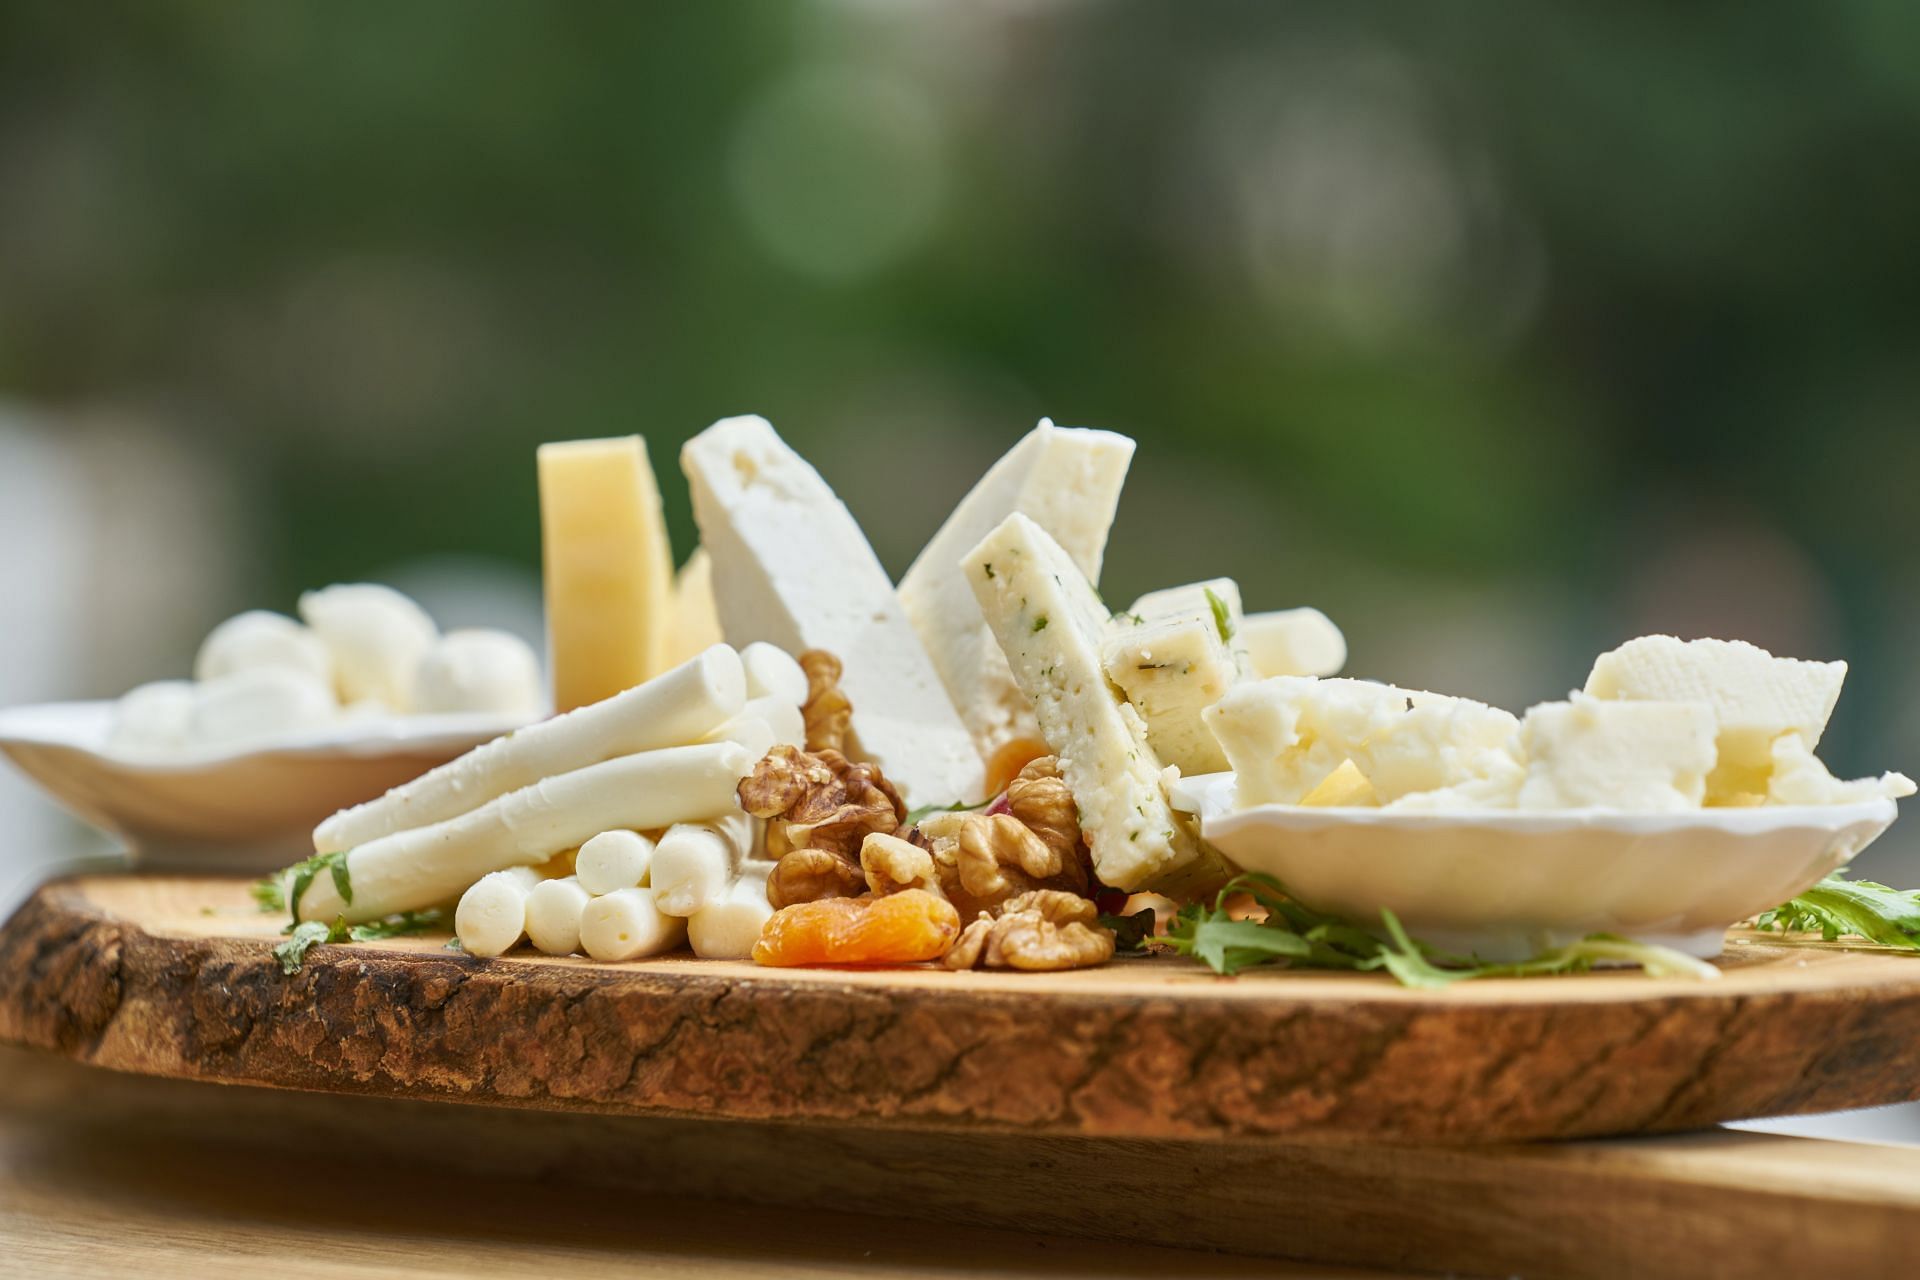 Dairy products like cheese, yogurt, and milk are good sources of Vitamin A (Image from Pexels @Engin Akyurt)